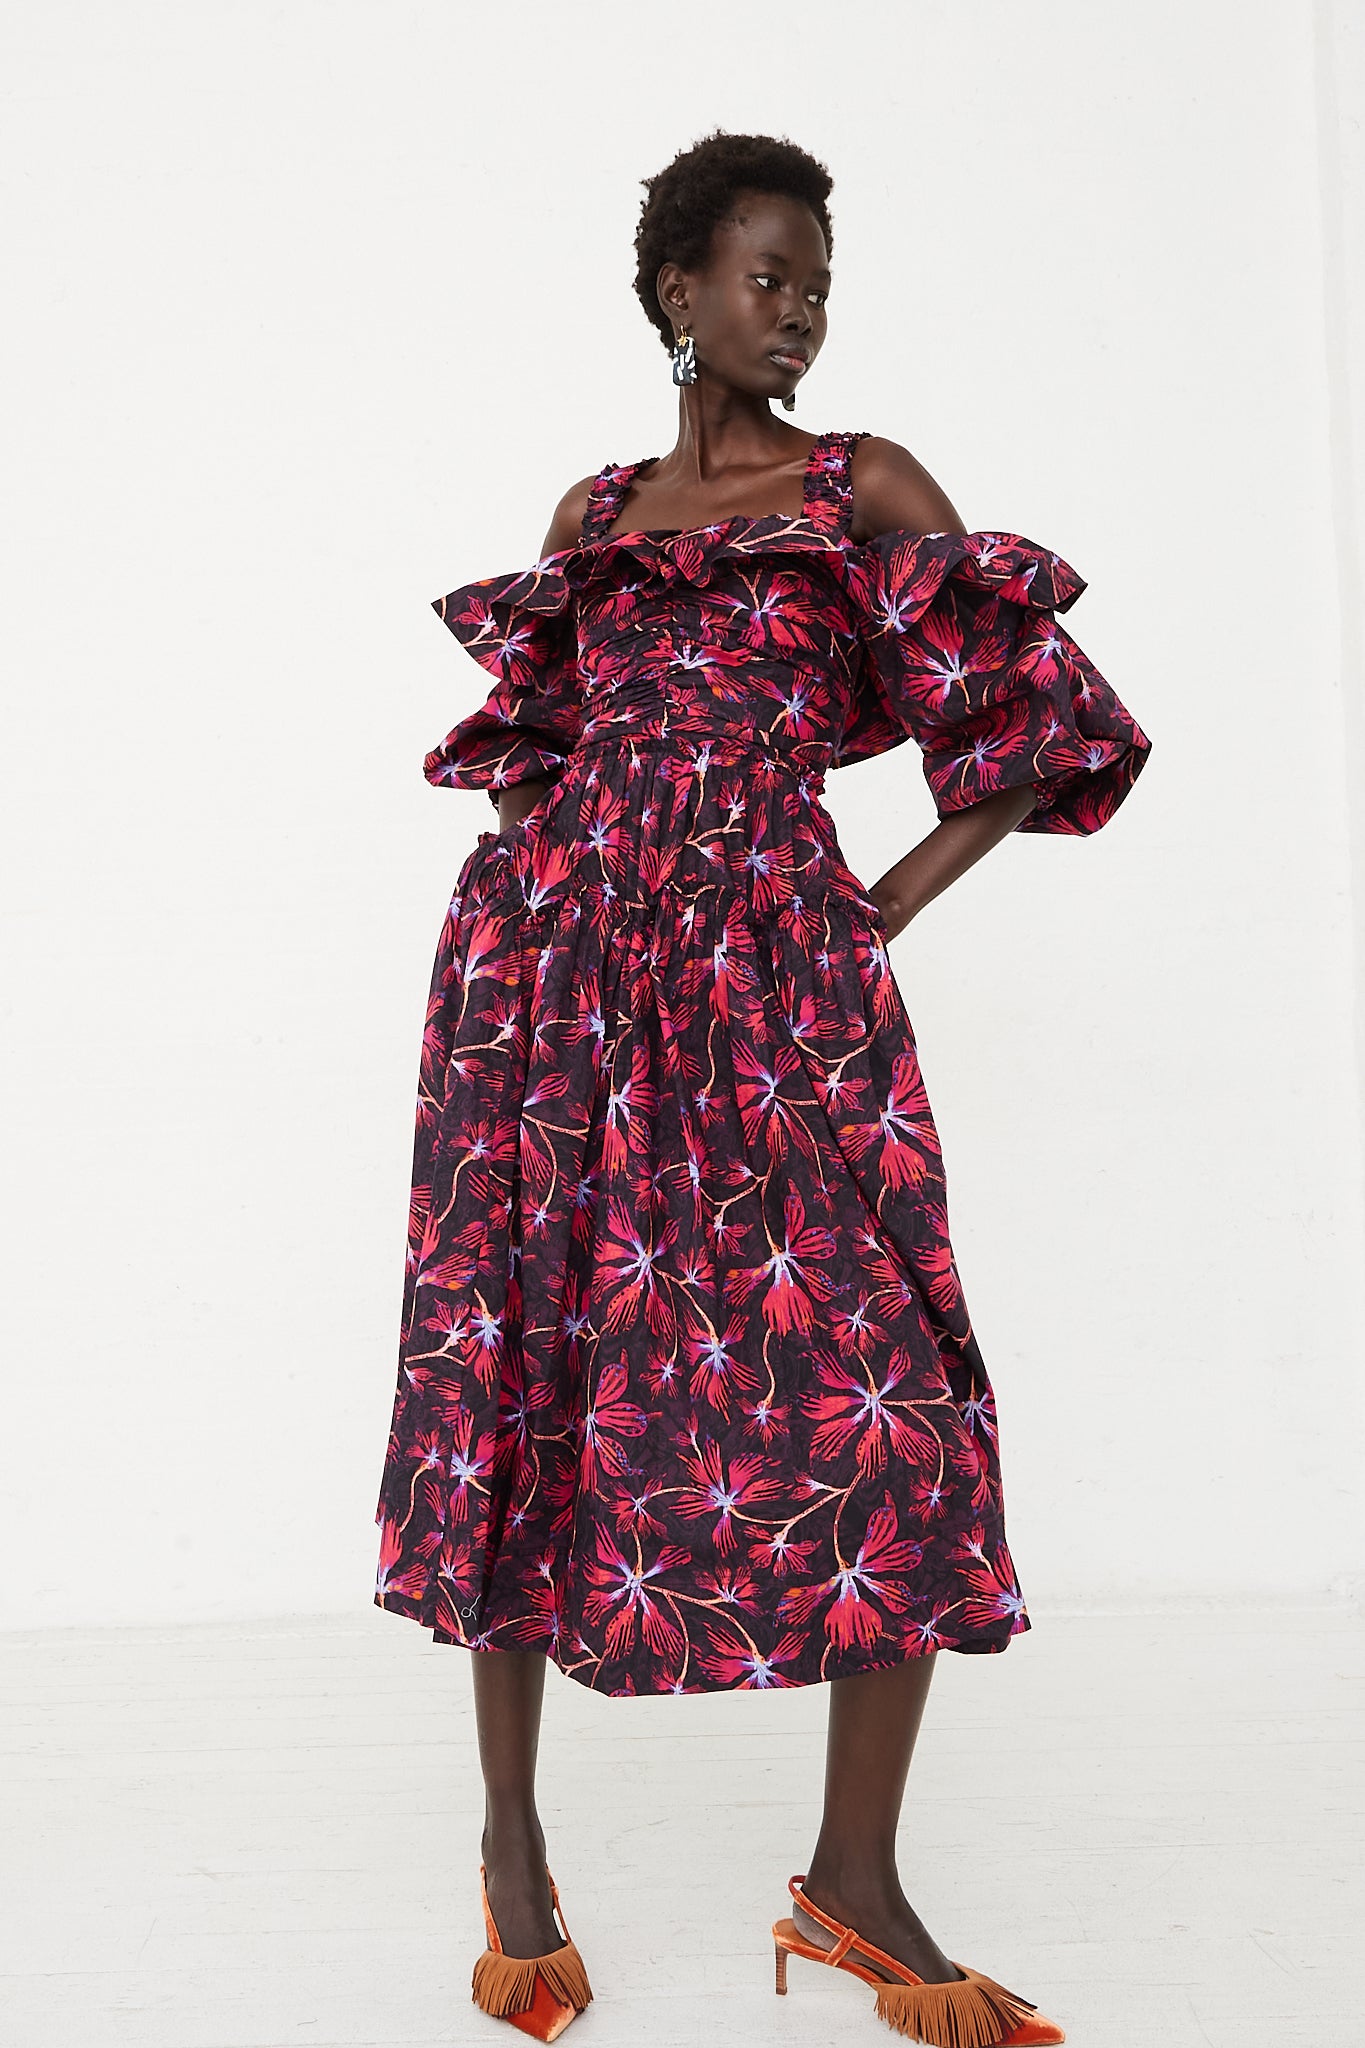 The model is wearing the Ulla Johnson Caprice Midi Dress in Zinnia, a patterned cotton poplin dress with vivid shades of magenta and hyacinth.